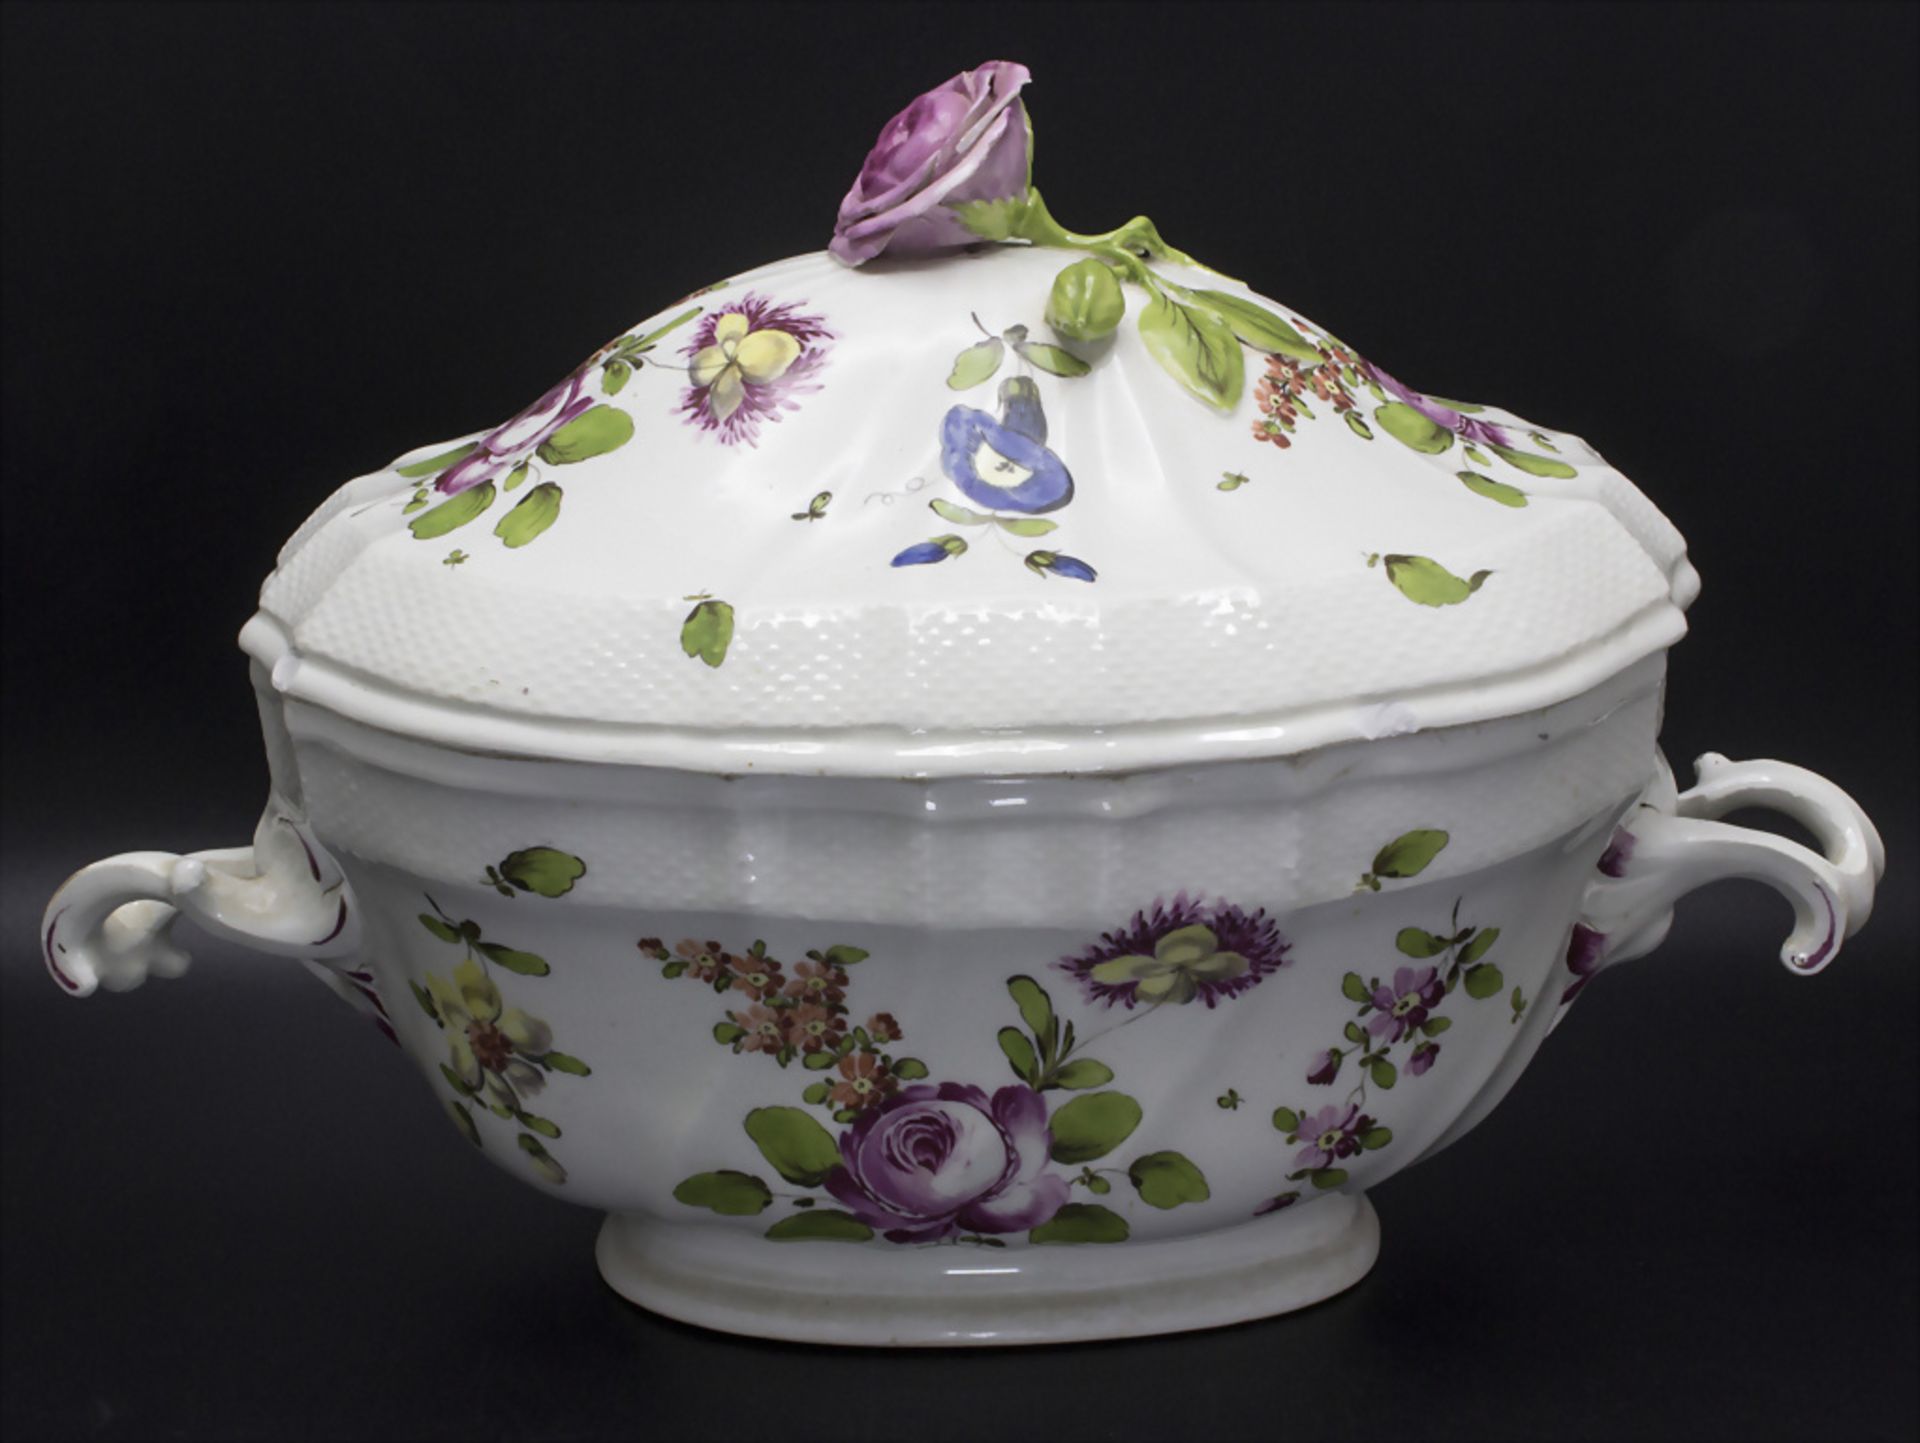 Große Deckelterrine mit Blumenmalerei / A covered tureen with flowers, Wien, 2. Hälfte 18. Jh. - Image 2 of 14